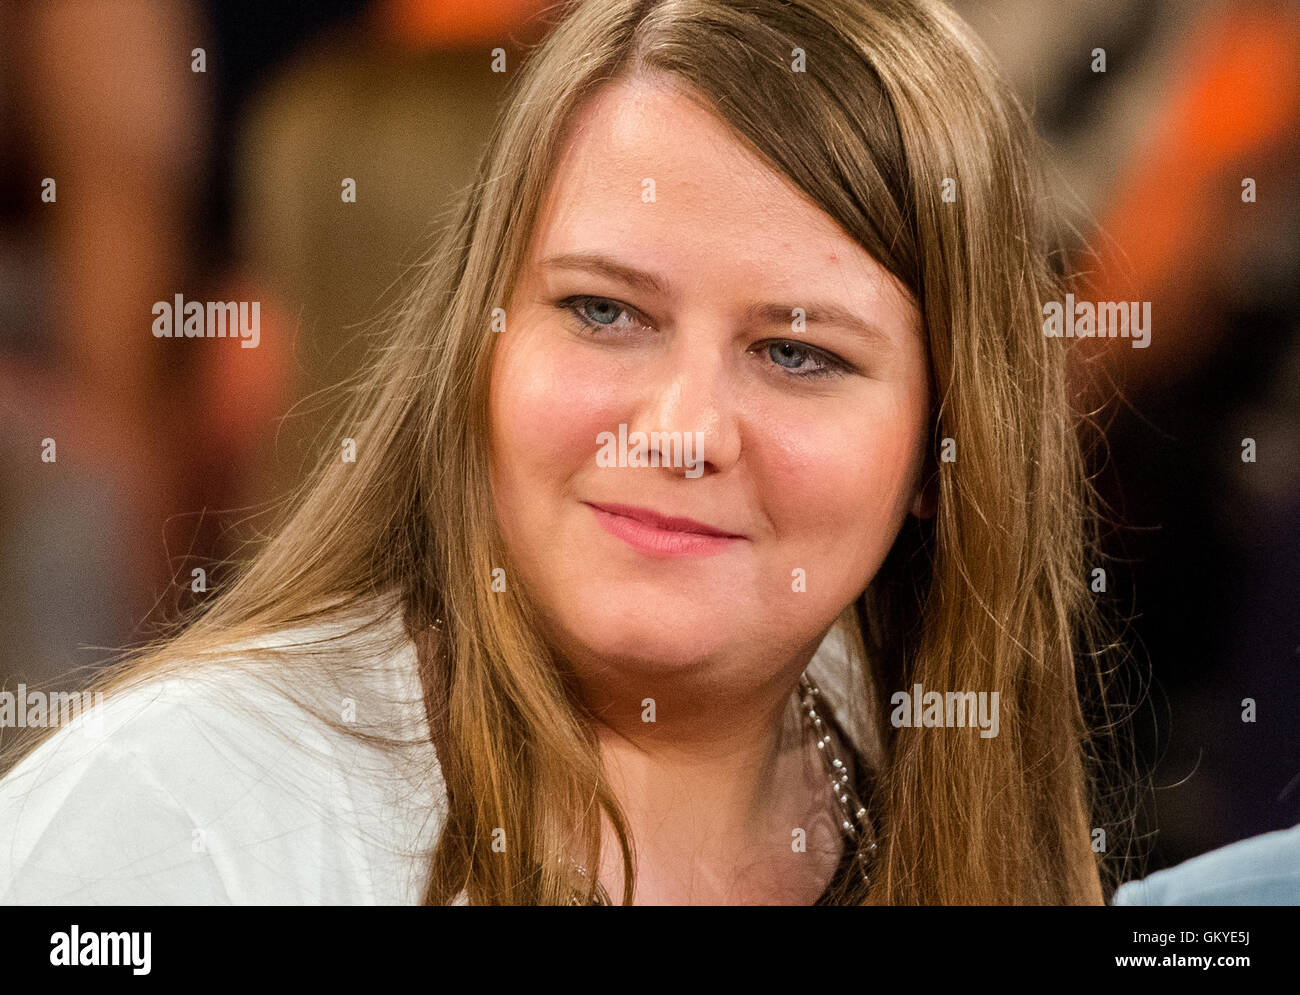 Abduction victim Natascha Kampusch pictured in the studio during the recording of ZDF talk show Markus Lanz, in Hamburg, Germany, 24 August 2016.   Photo: Daniel Bockwoldt/dpa Stock Photo